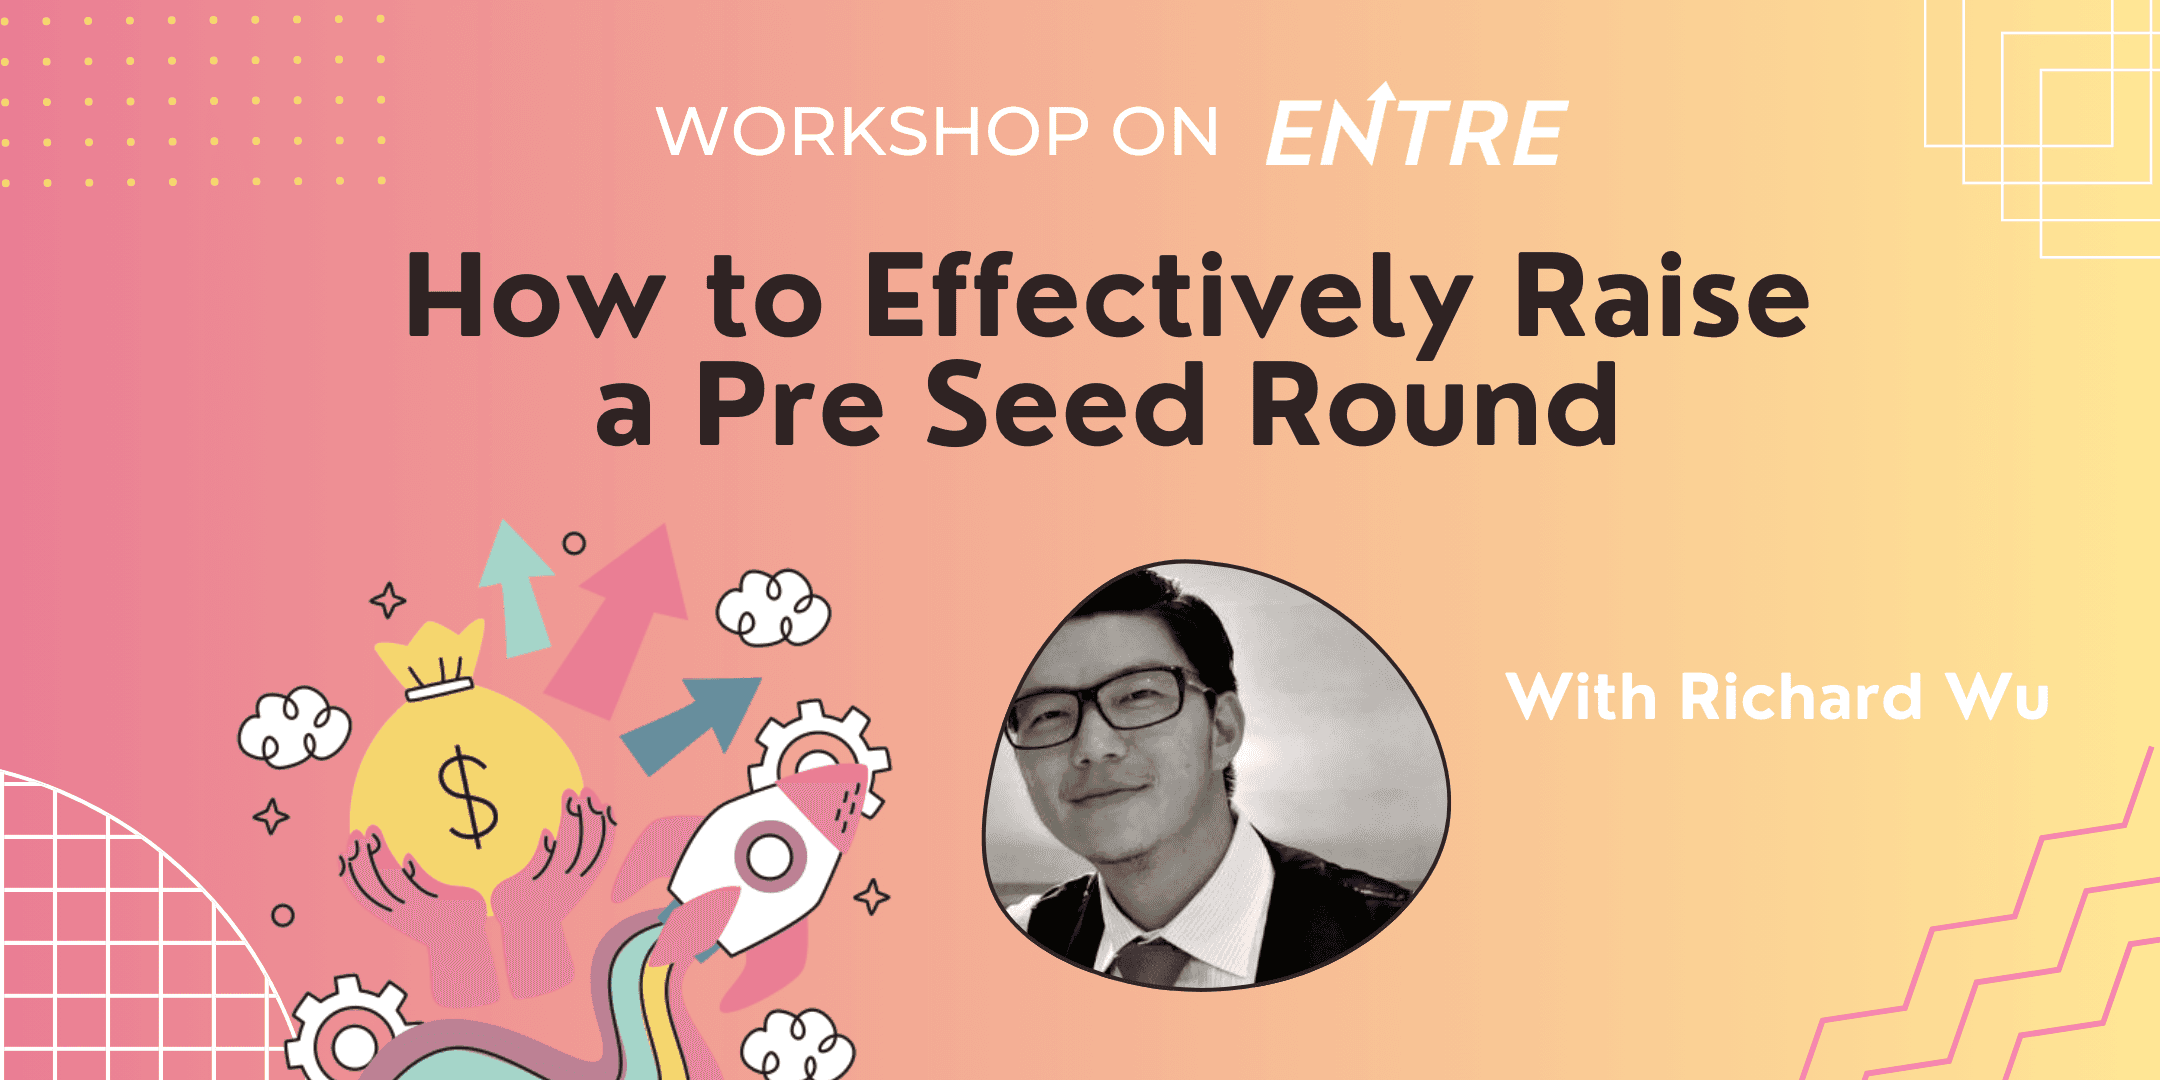 How to Effectively Raise a Pre Seed Round